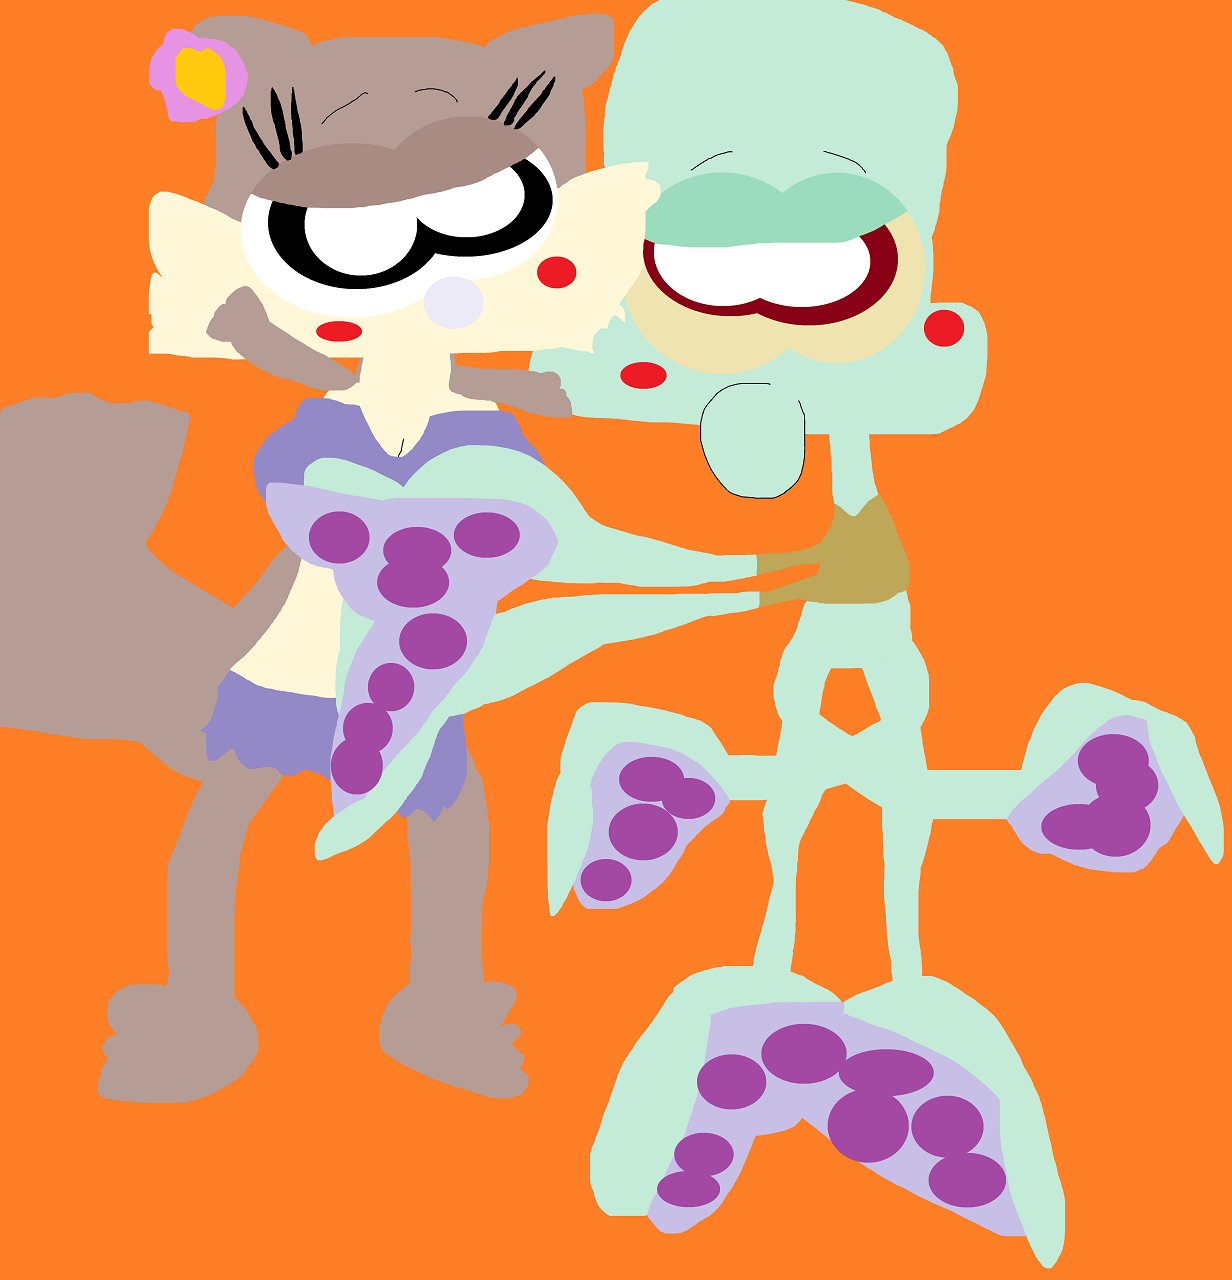 Sneakier Squidward Grabbing Sandy While He Kisses Her Lips.png by Falconlobo